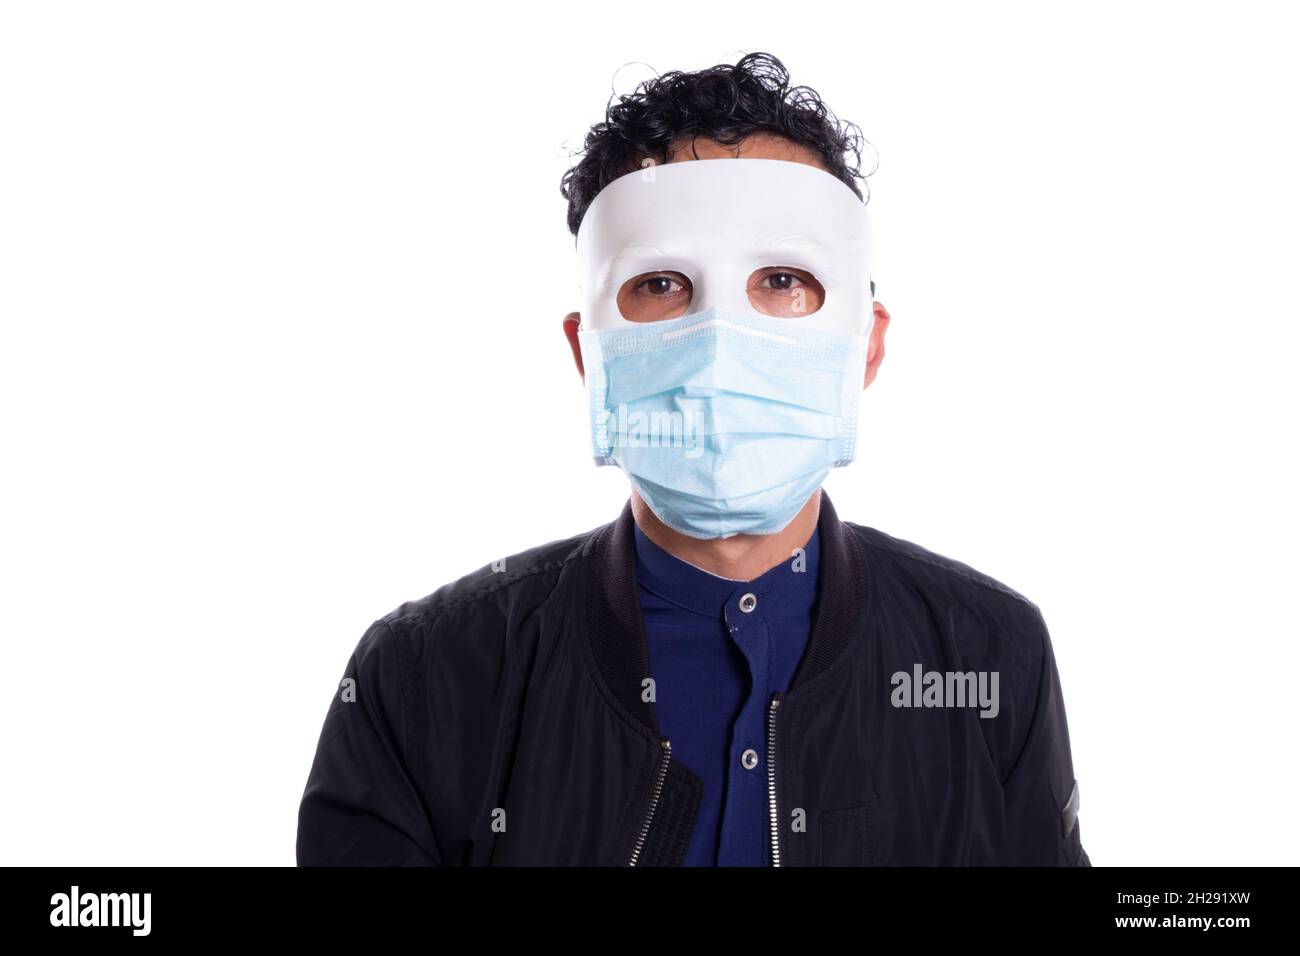 Man wearing white mask with a face mask. Isolated on white background. Costumes for covid. Biosecurity. Stock Photo